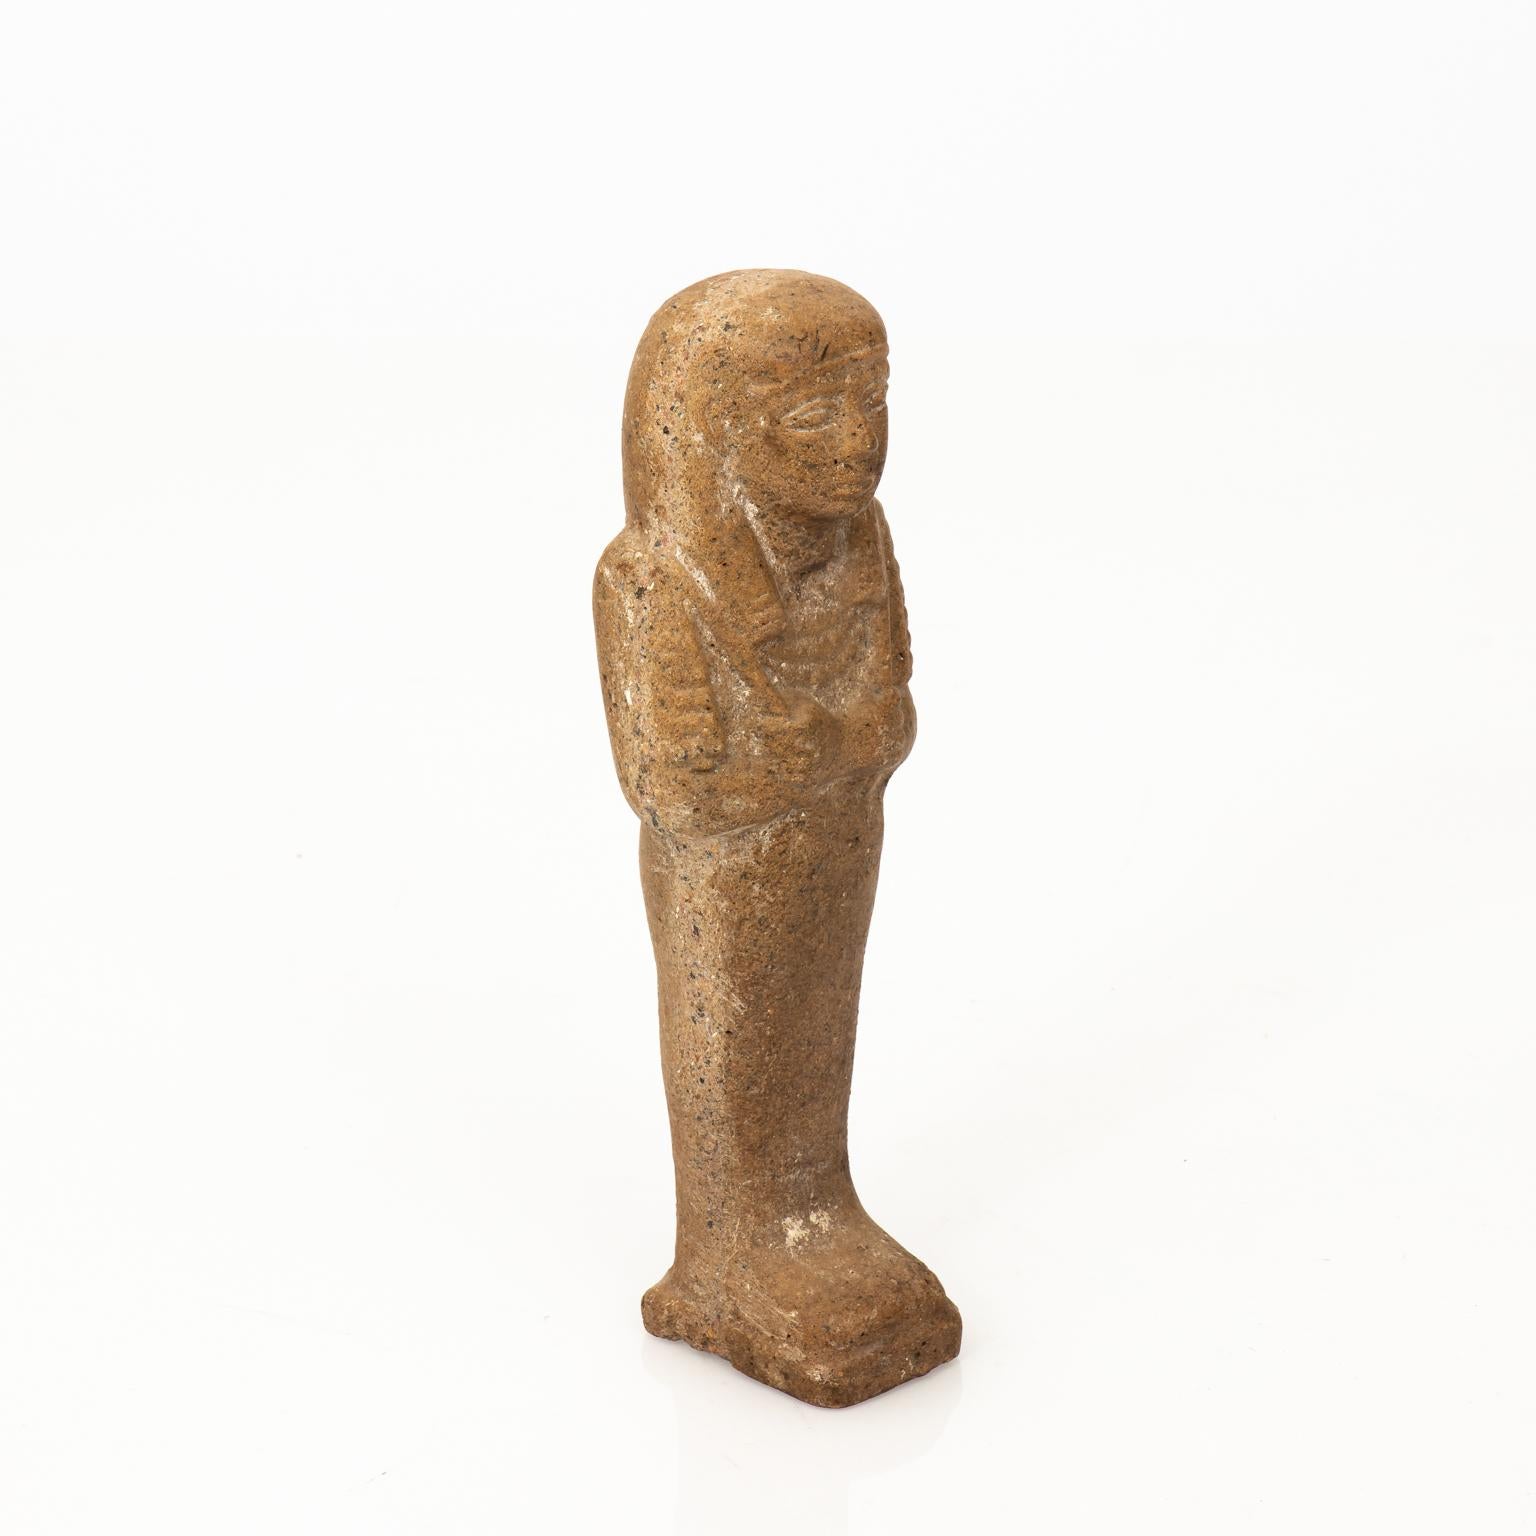 Egyptian Revival style decorative figurine carved out of granite, circa early 20th century.
      